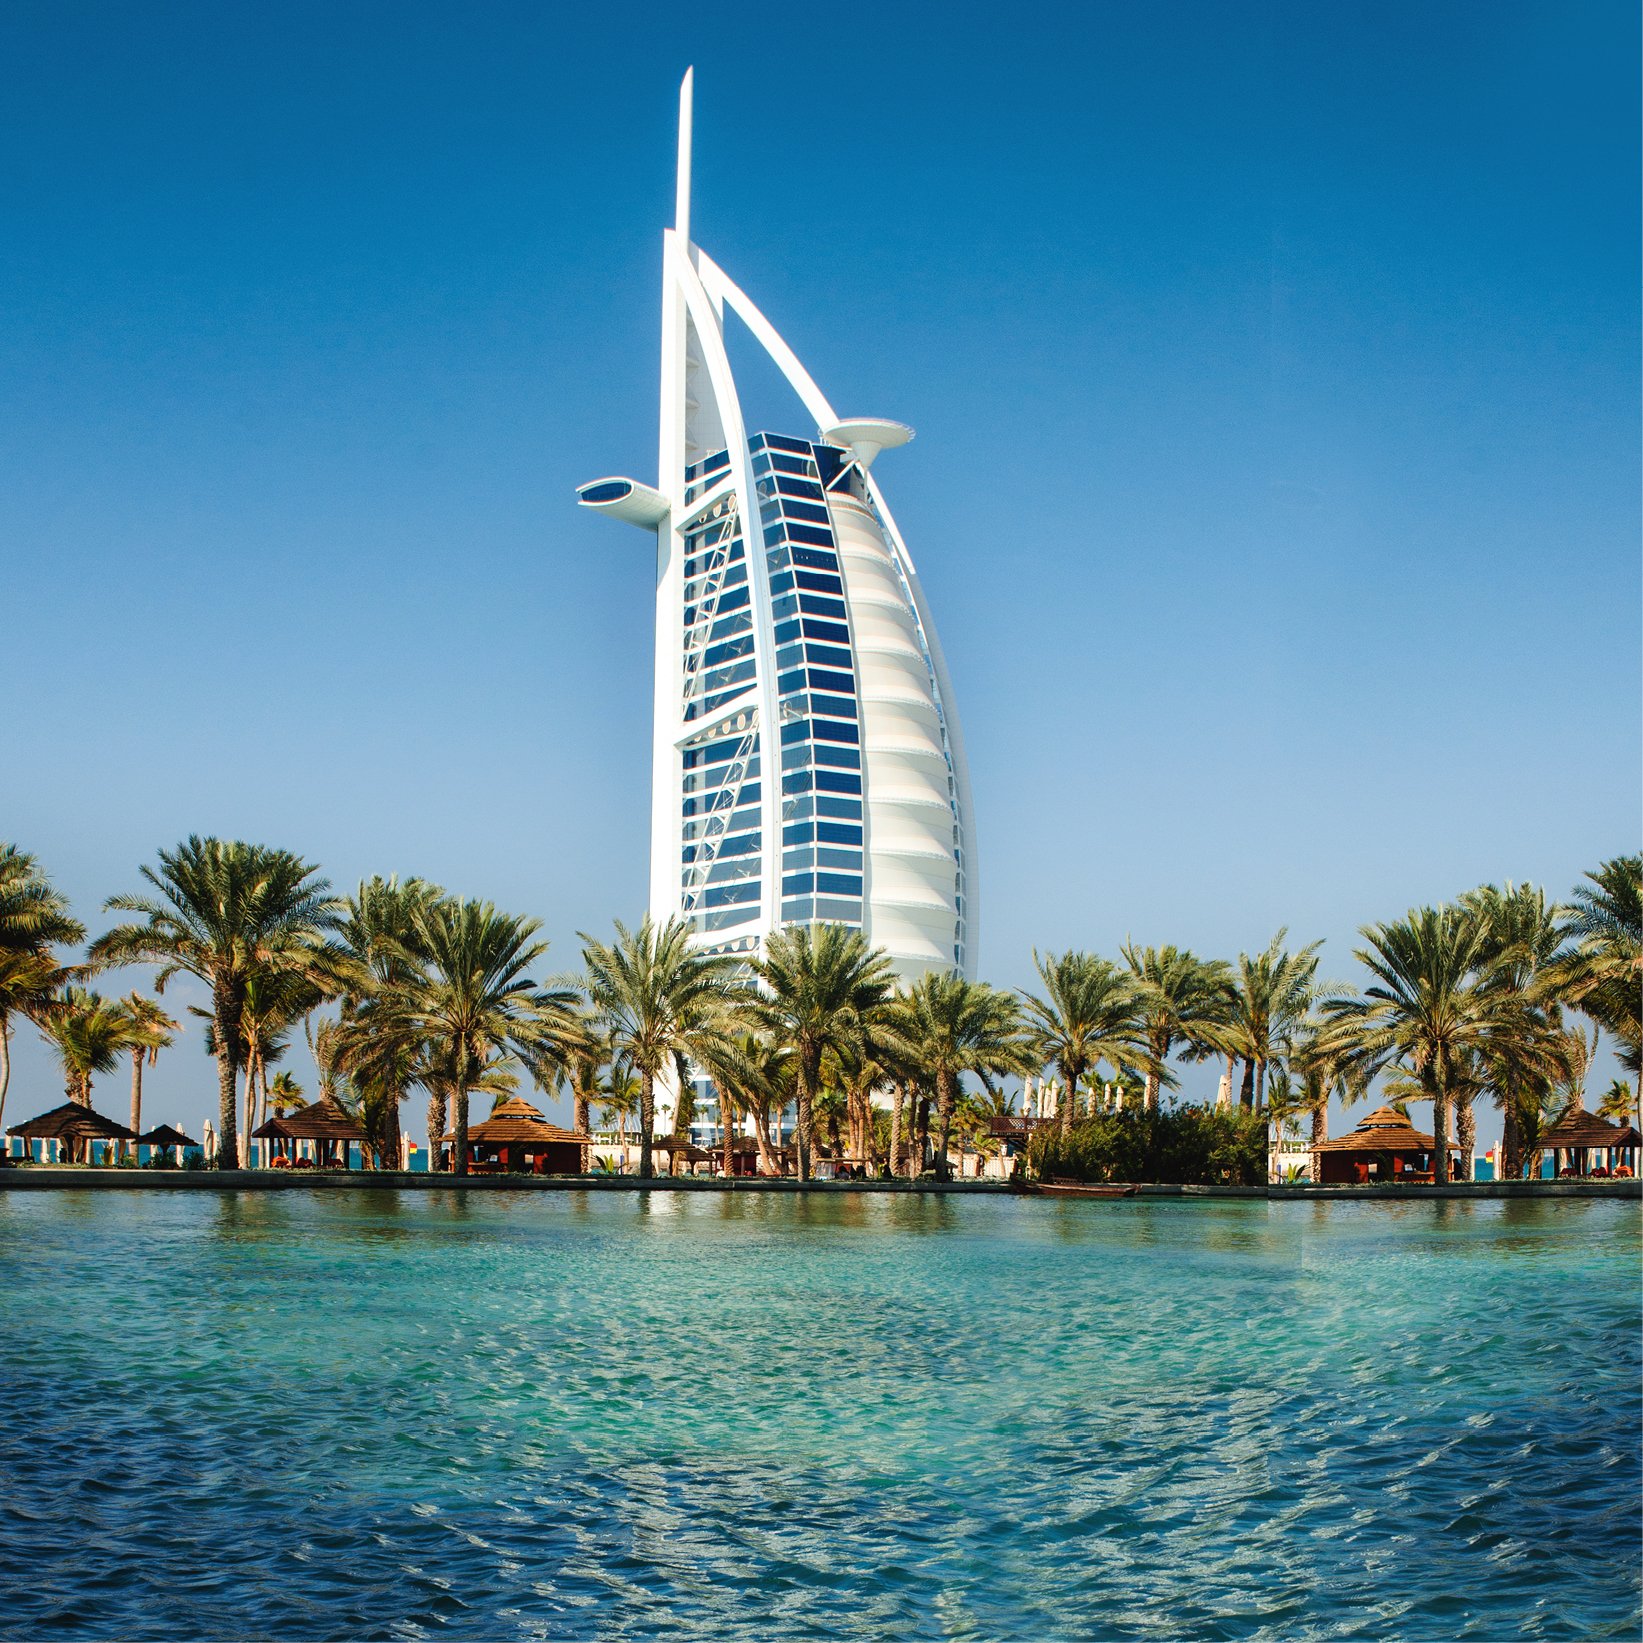 10 profitable businesses you can do in Dubai as a foreigner.